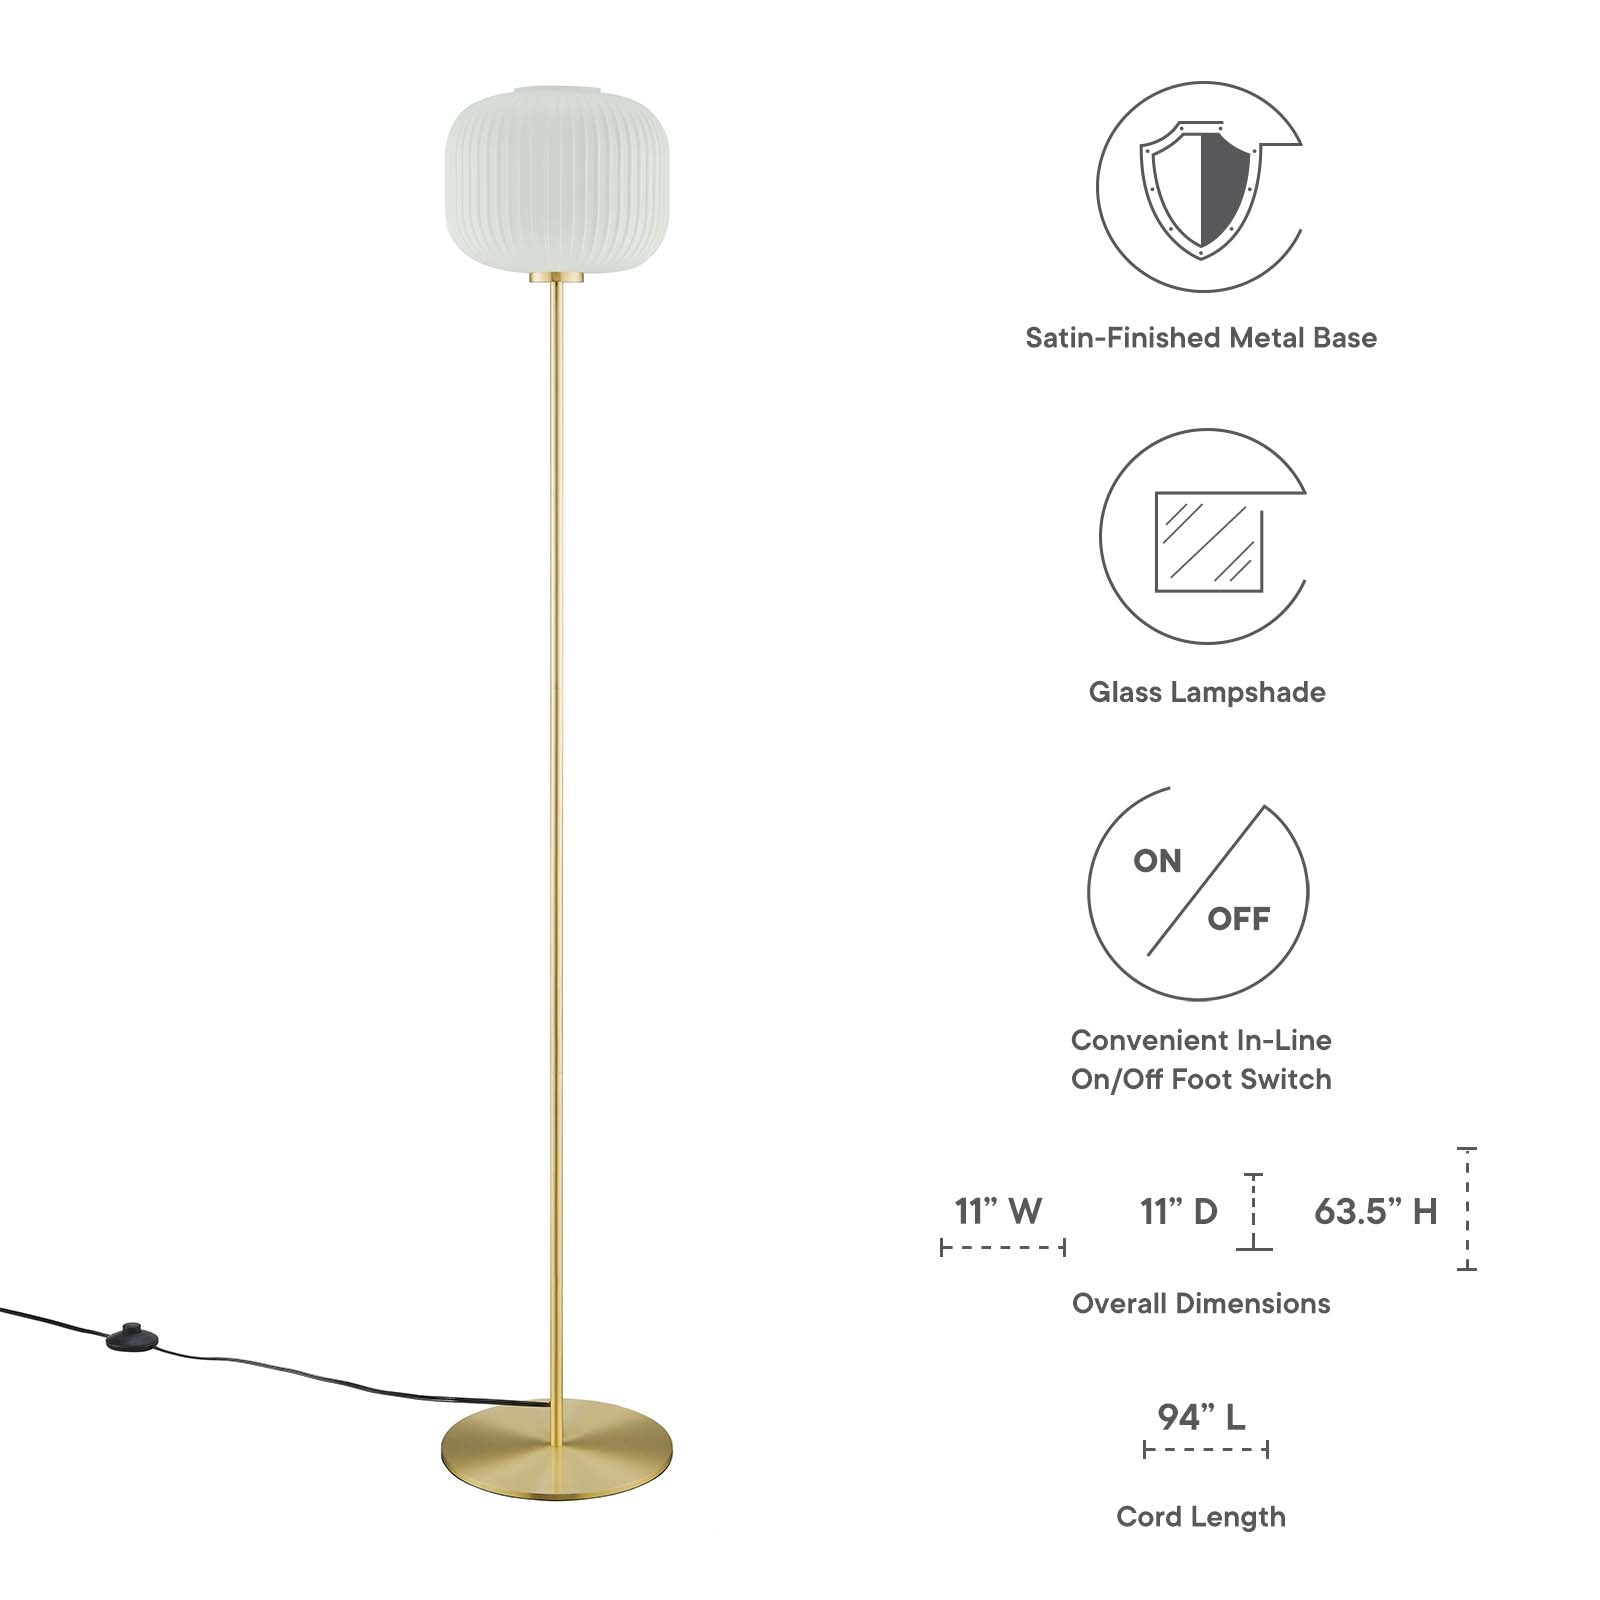 Modway Floor Lamps - Reprise Glass Sphere Glass And Metal Floor Lamp White Satin Brass